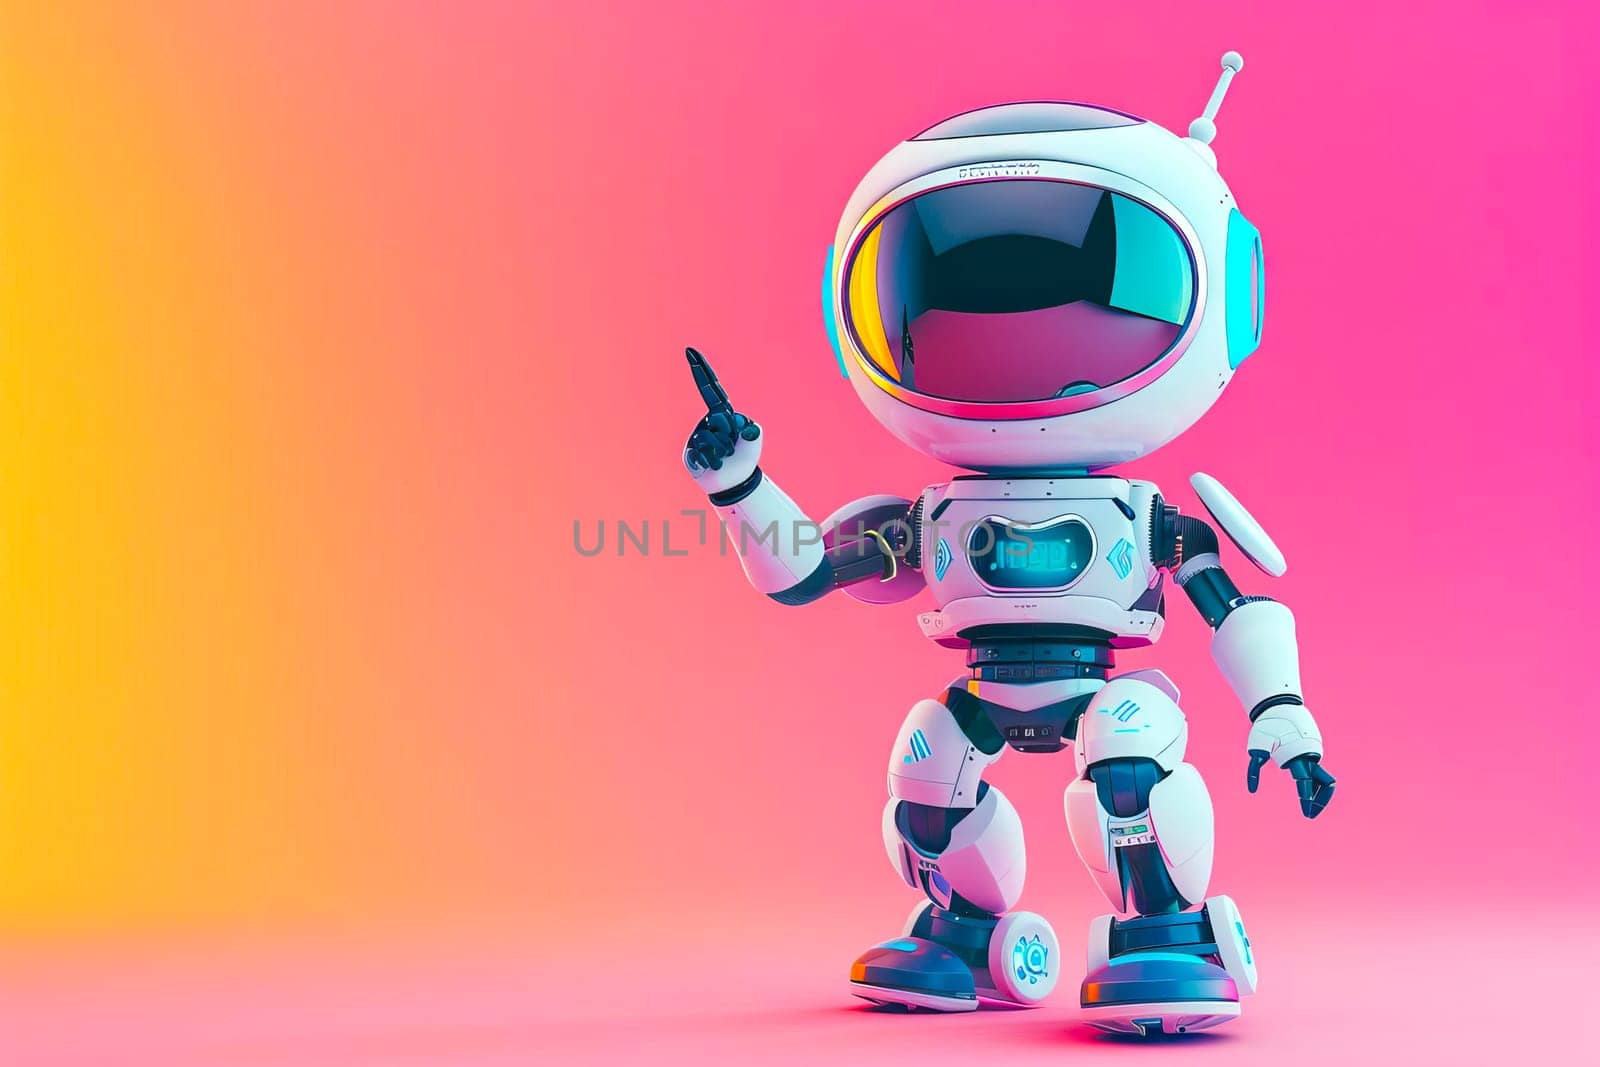 Bright white robot with cute appearance against a vibrant pink and yellow backdrop. by vladimka